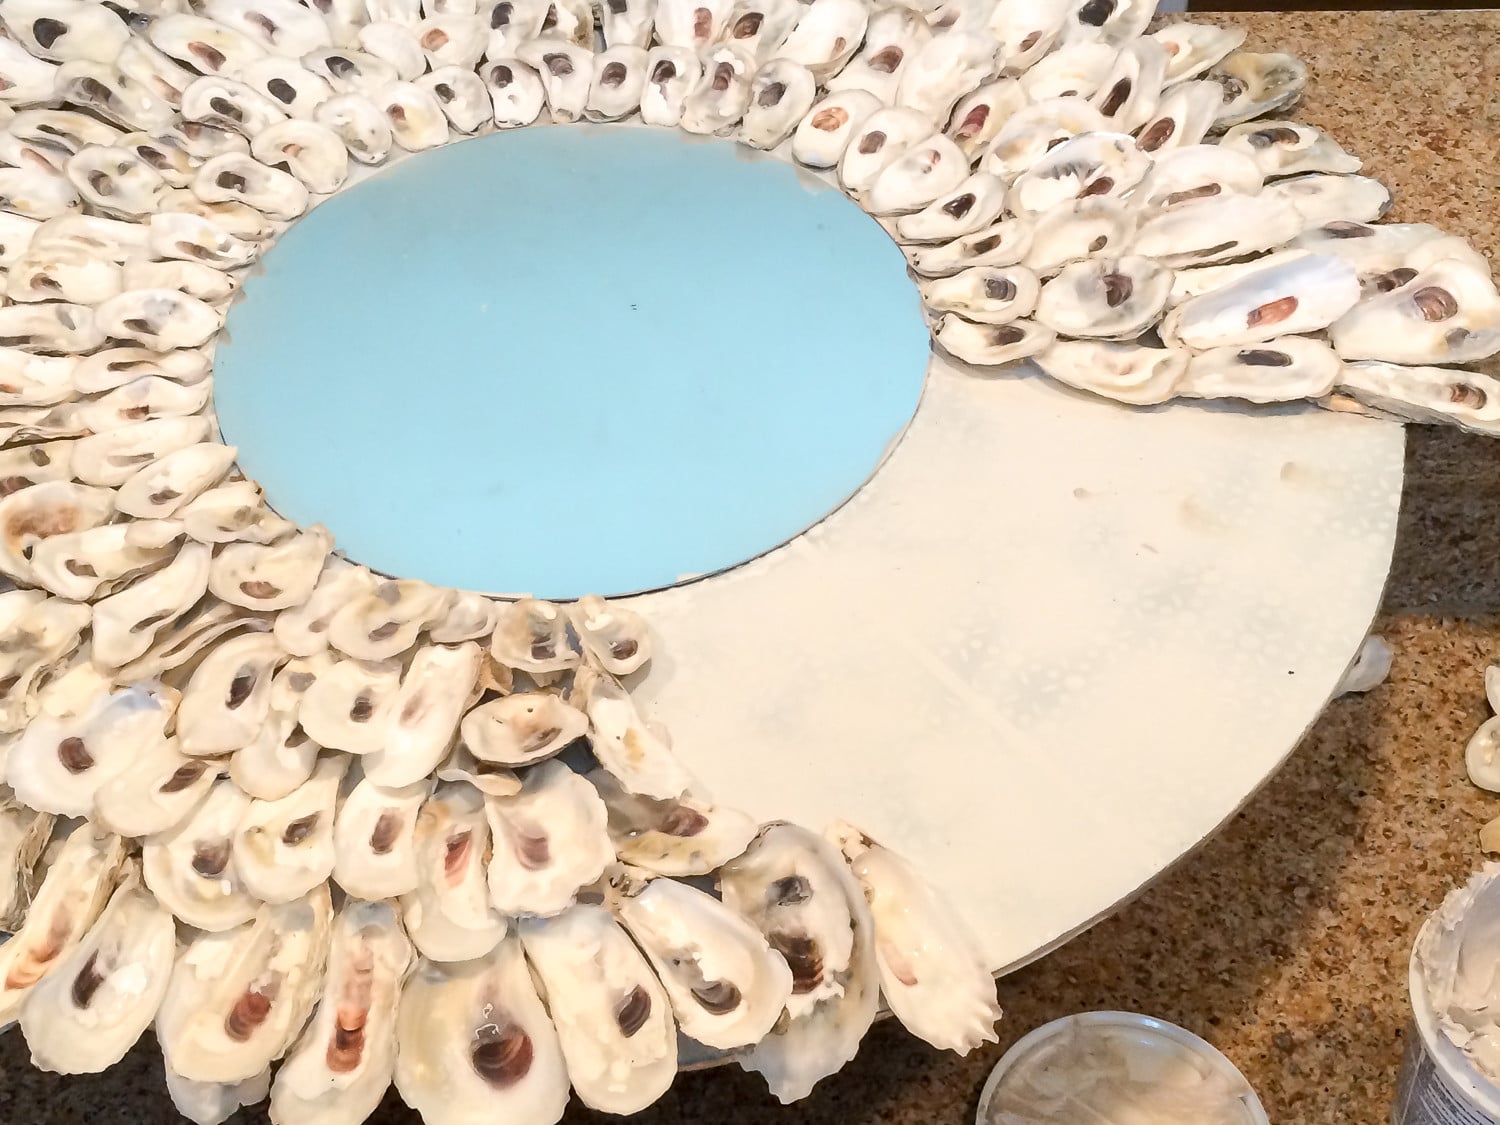 Oyster shells are partially glued on the mirror base.